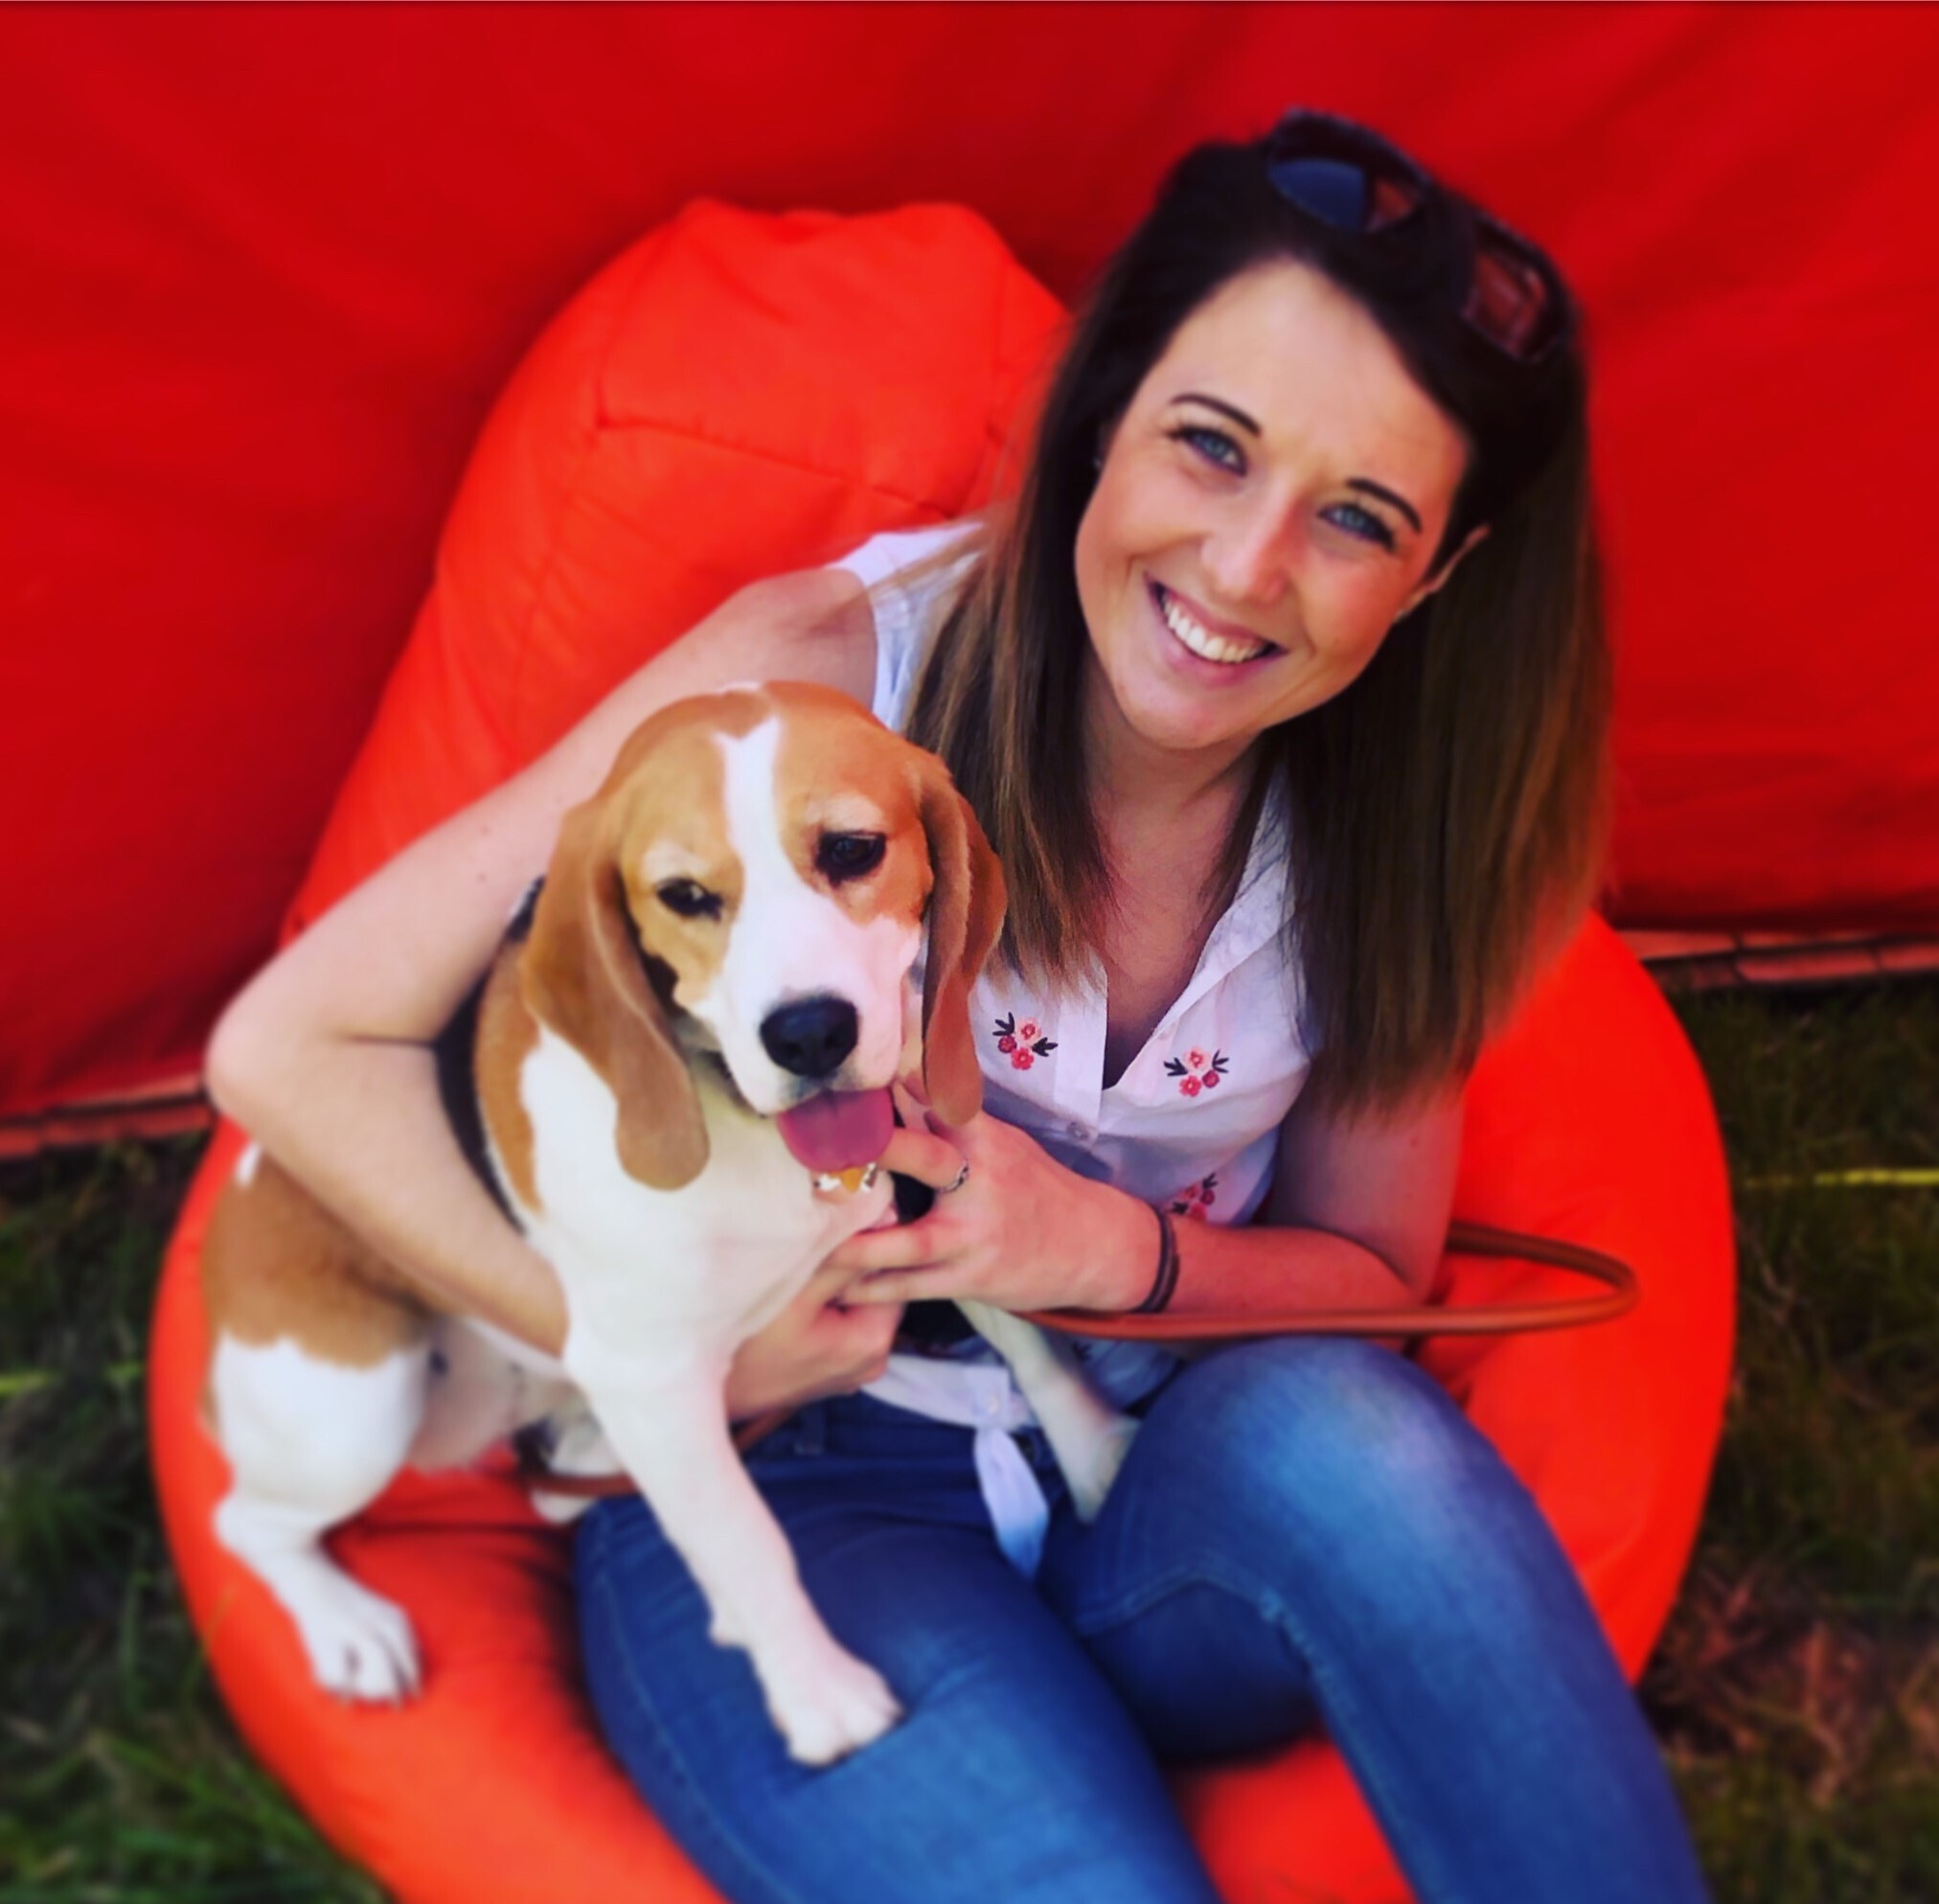 Image of Katy Morris with a dog.